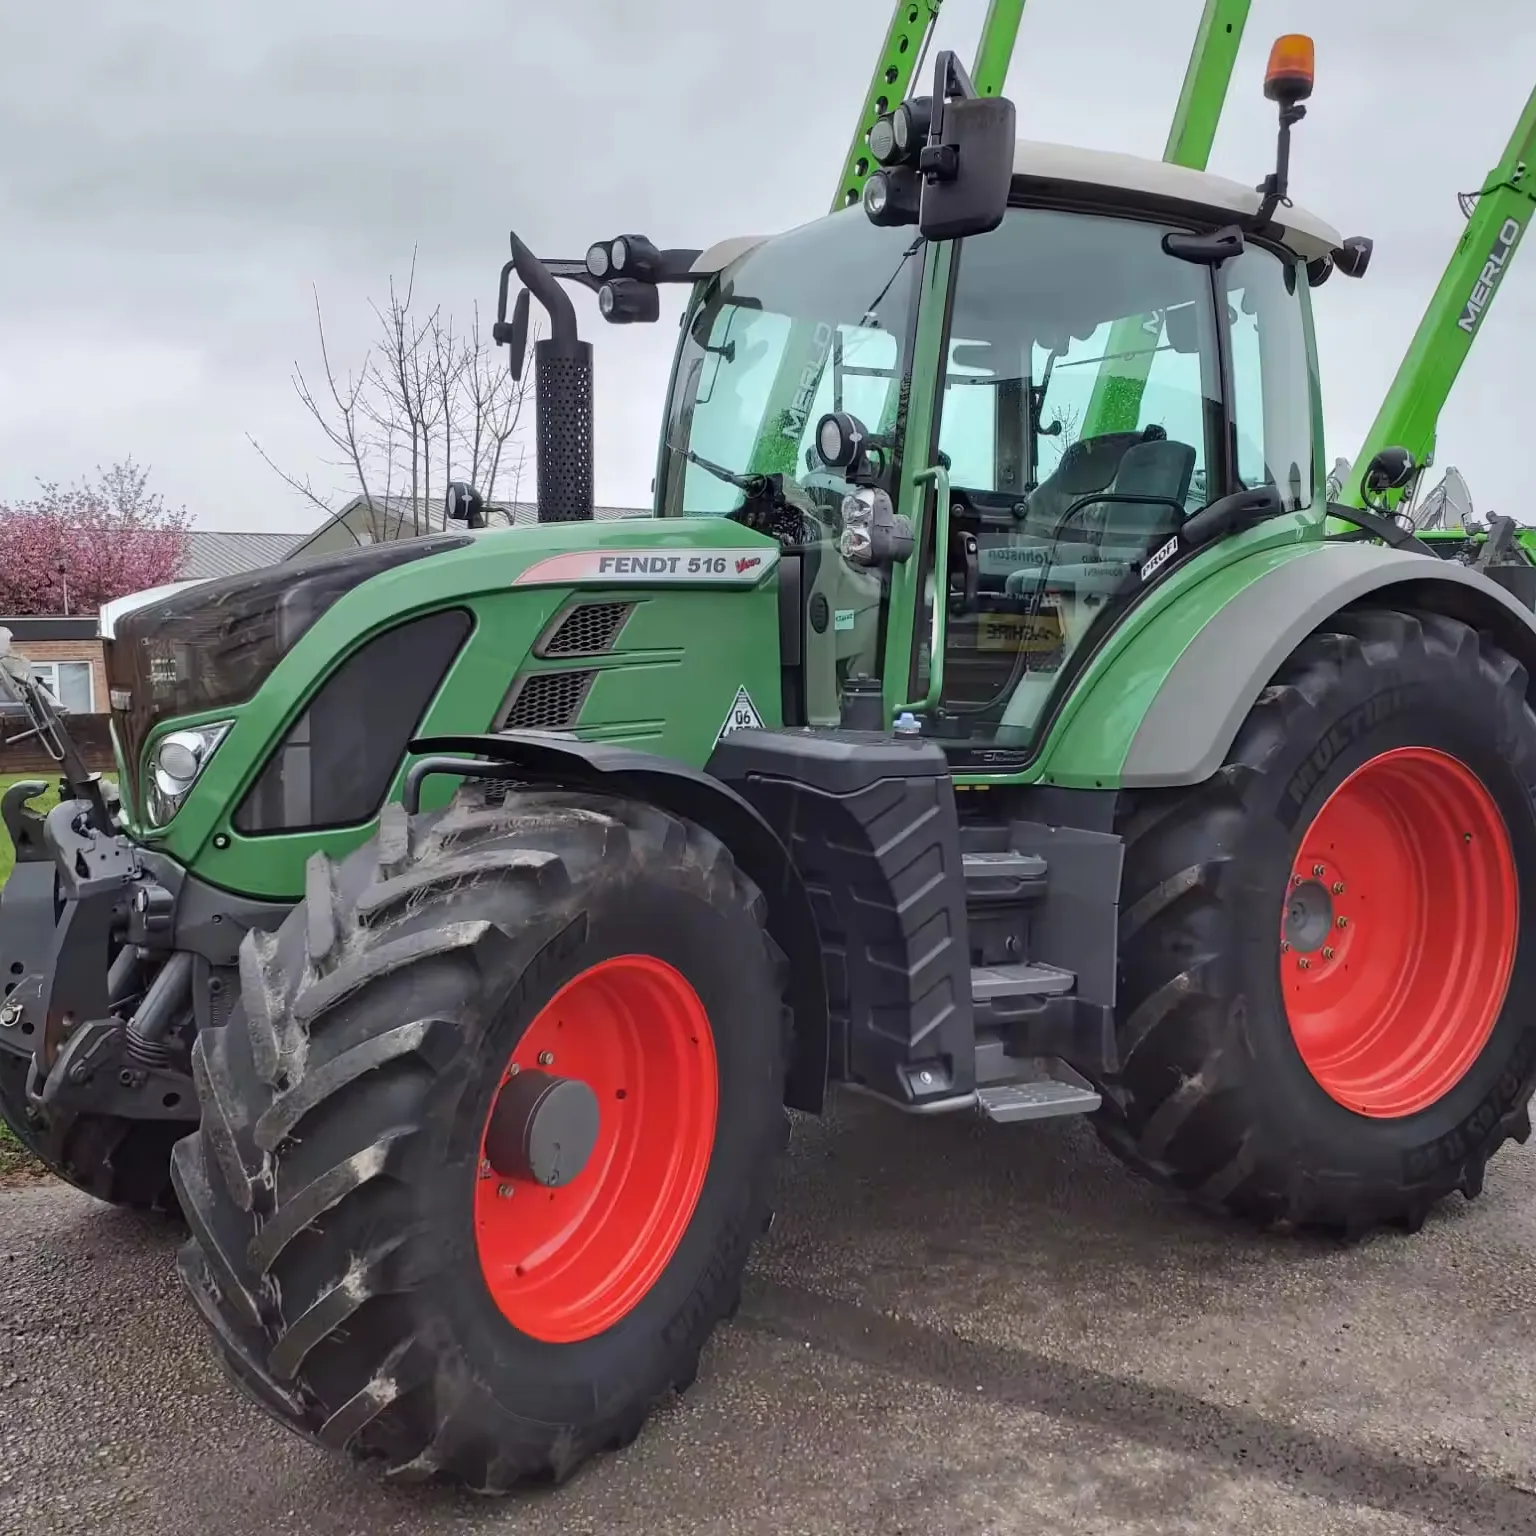 Used 4x4 Wheel Drive Tractor Fendt 1050 Vario Tractor 4WD 120HP Fendt 516 Tractor For Agricultural Farm Work